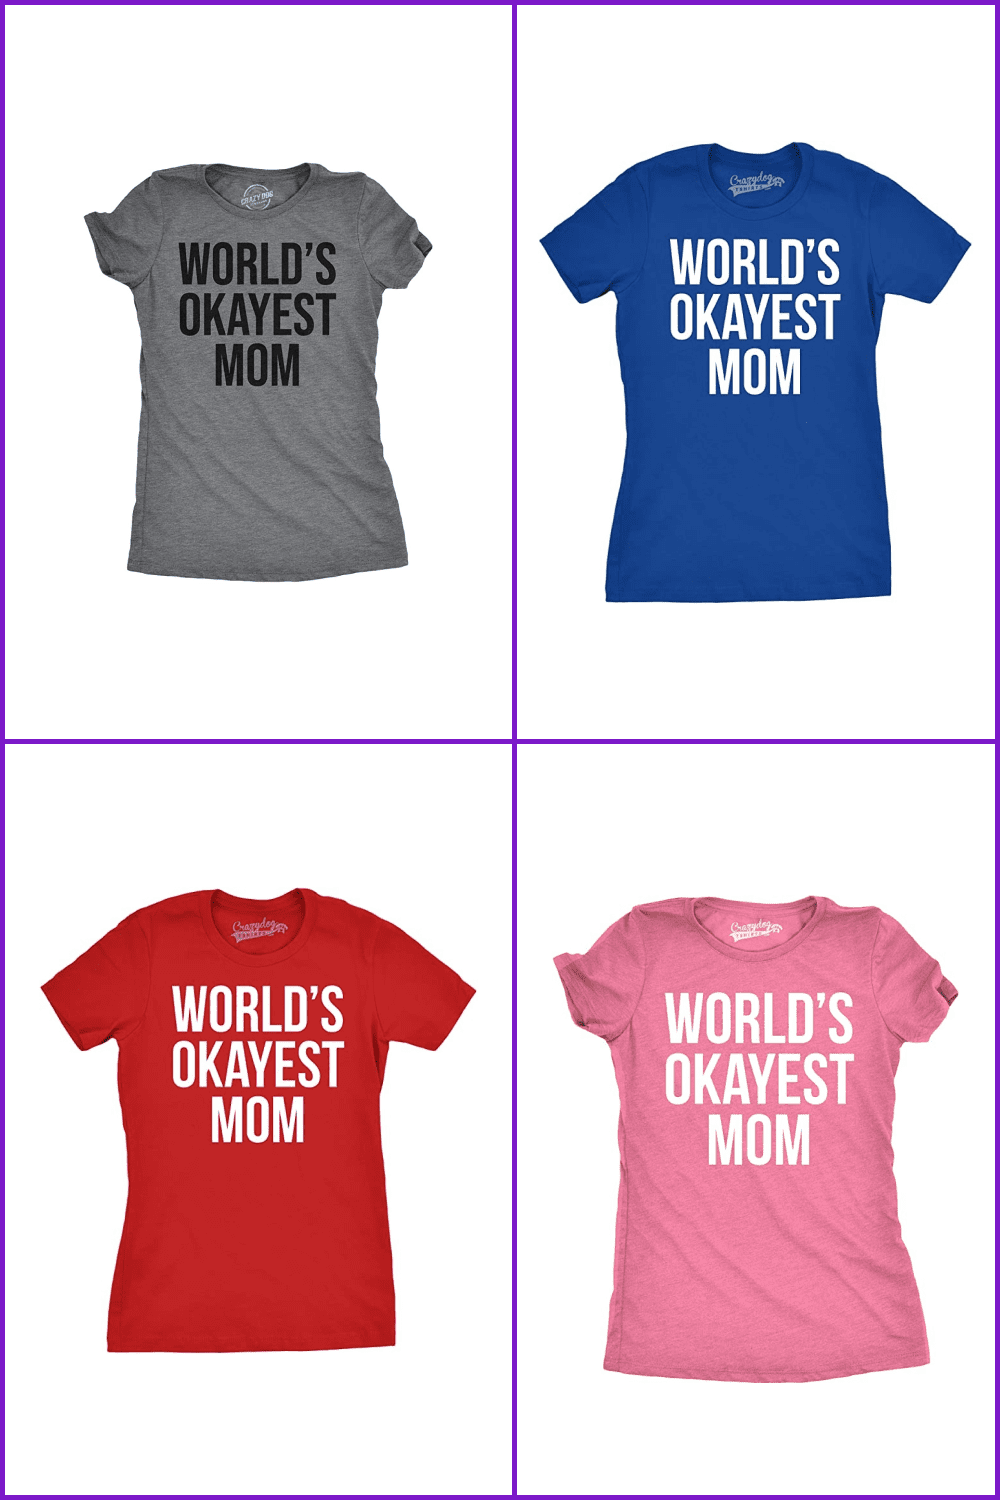 T-shirts of different colors with an inscription about mom..